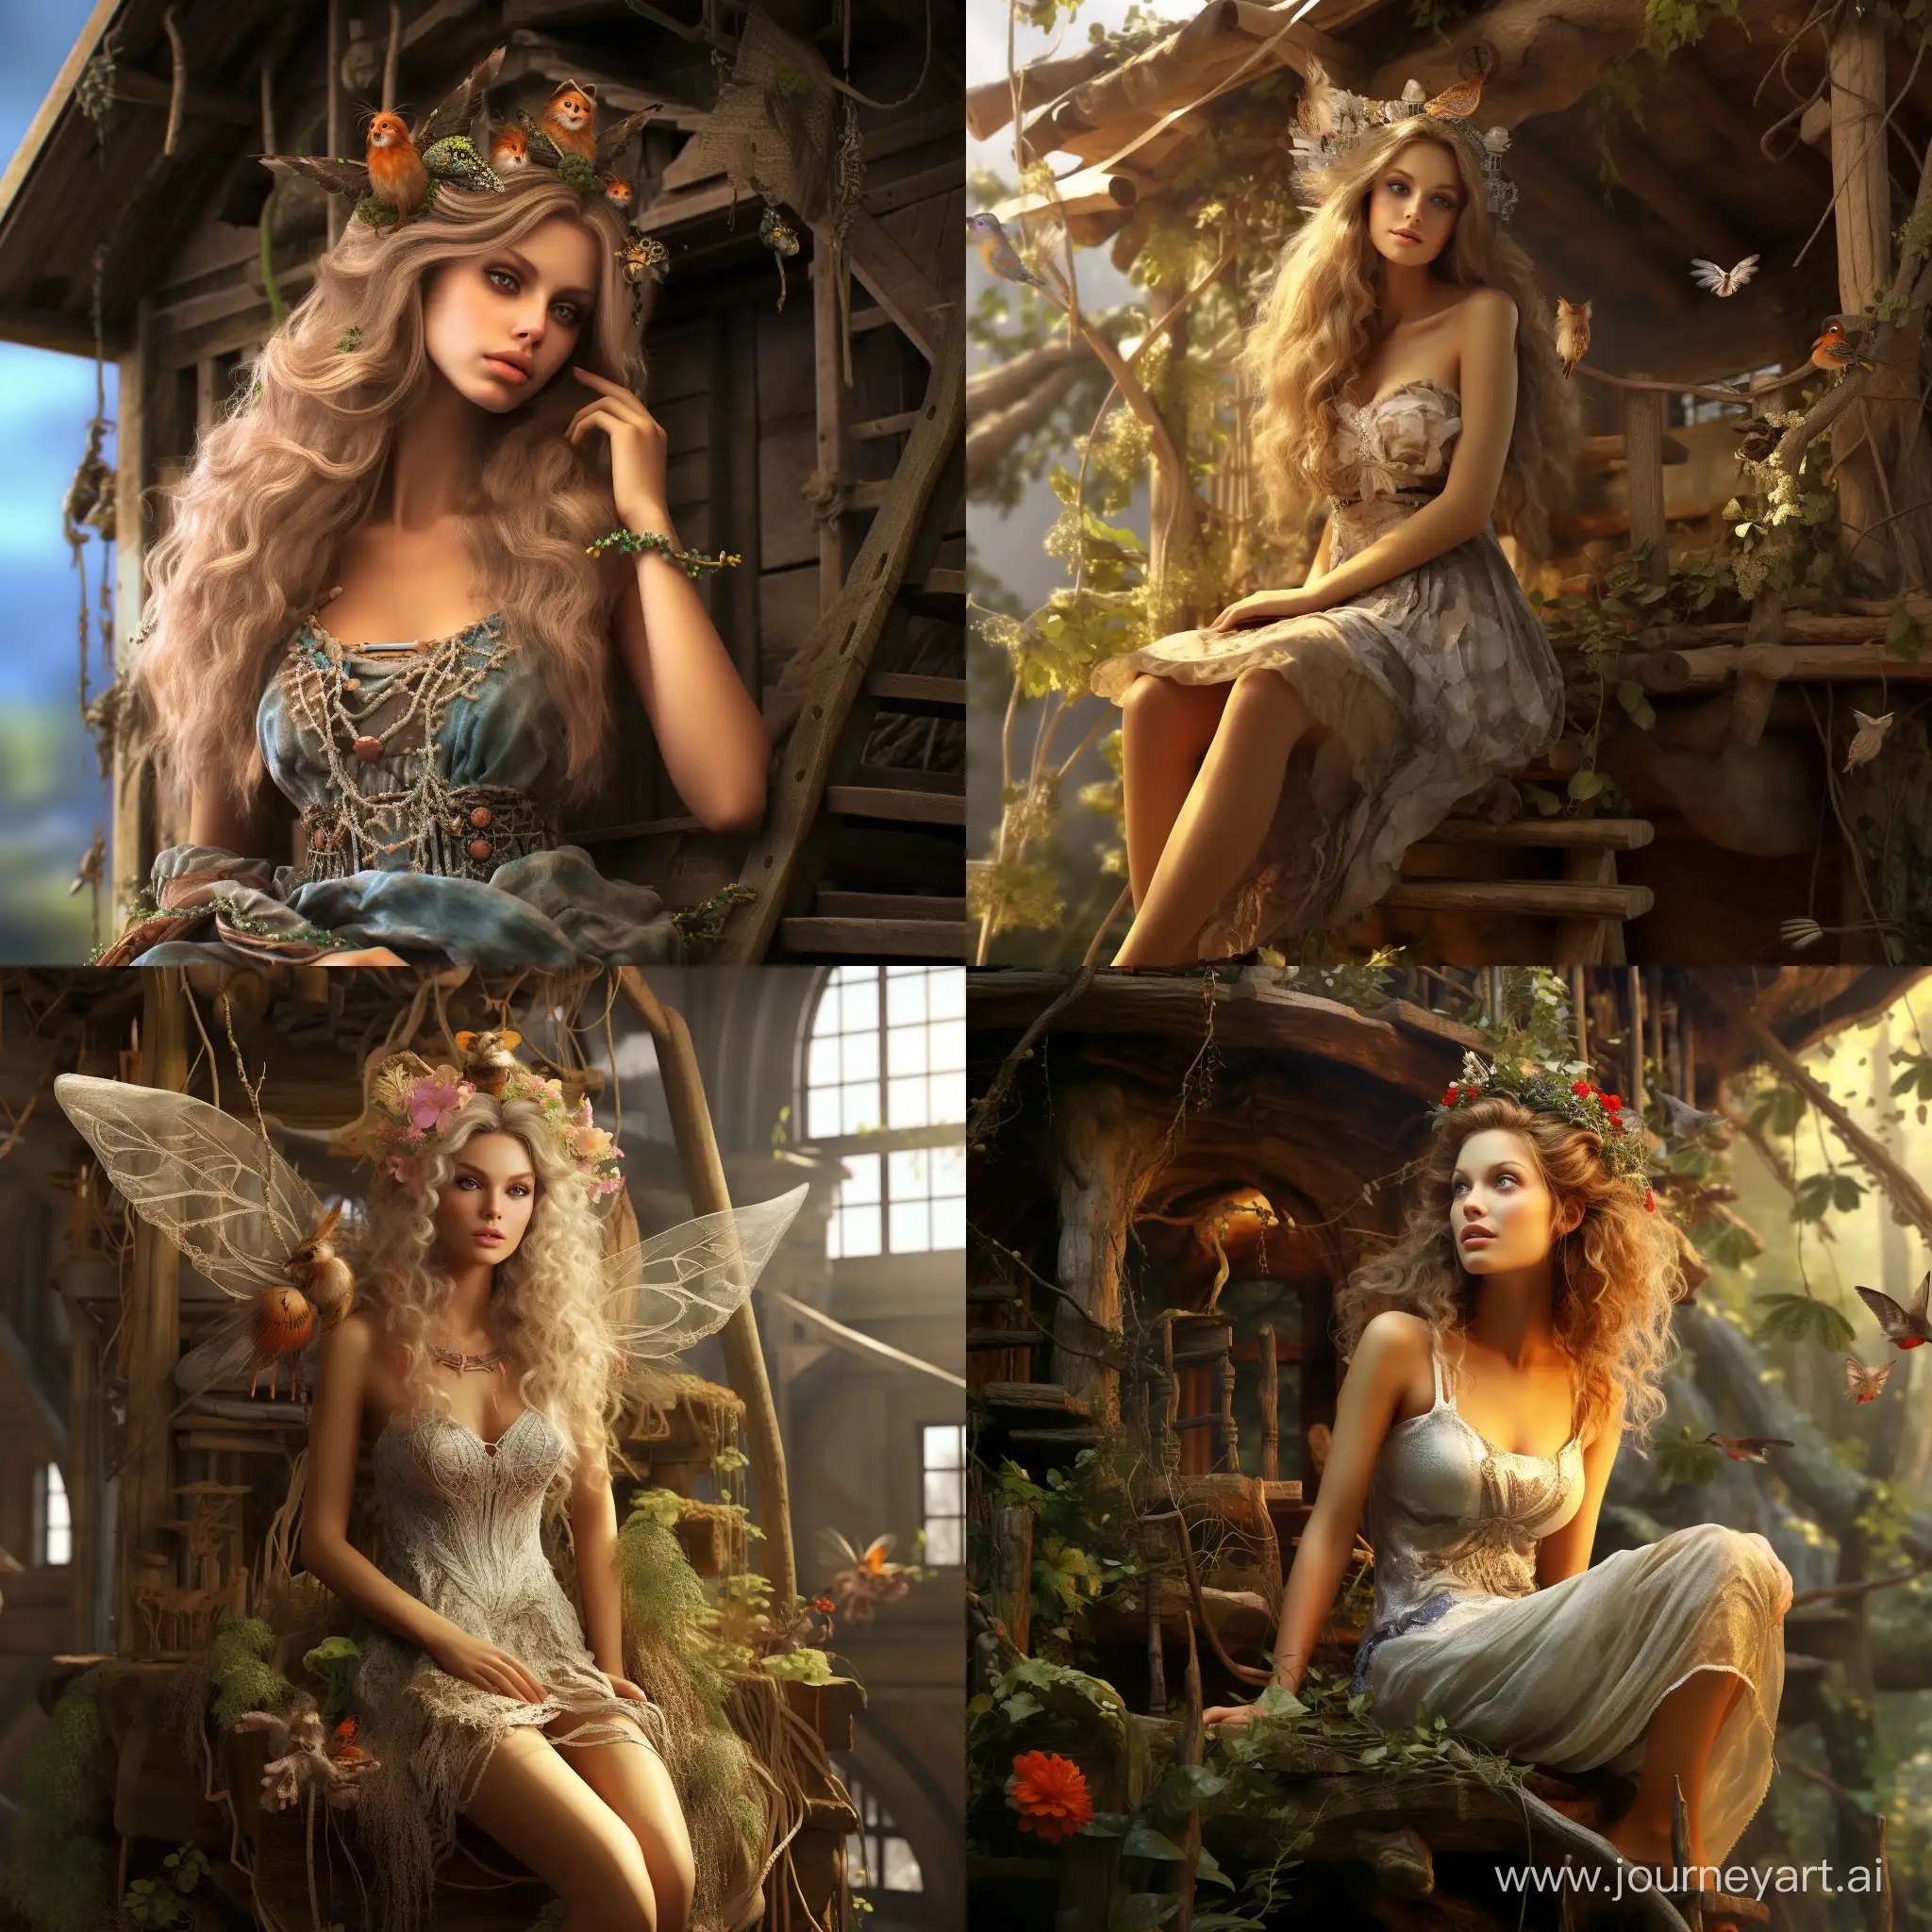 Compassionate-MiddleAged-Fairy-Tending-to-Forest-Creatures-Outside-Her-Enchanted-Tree-House